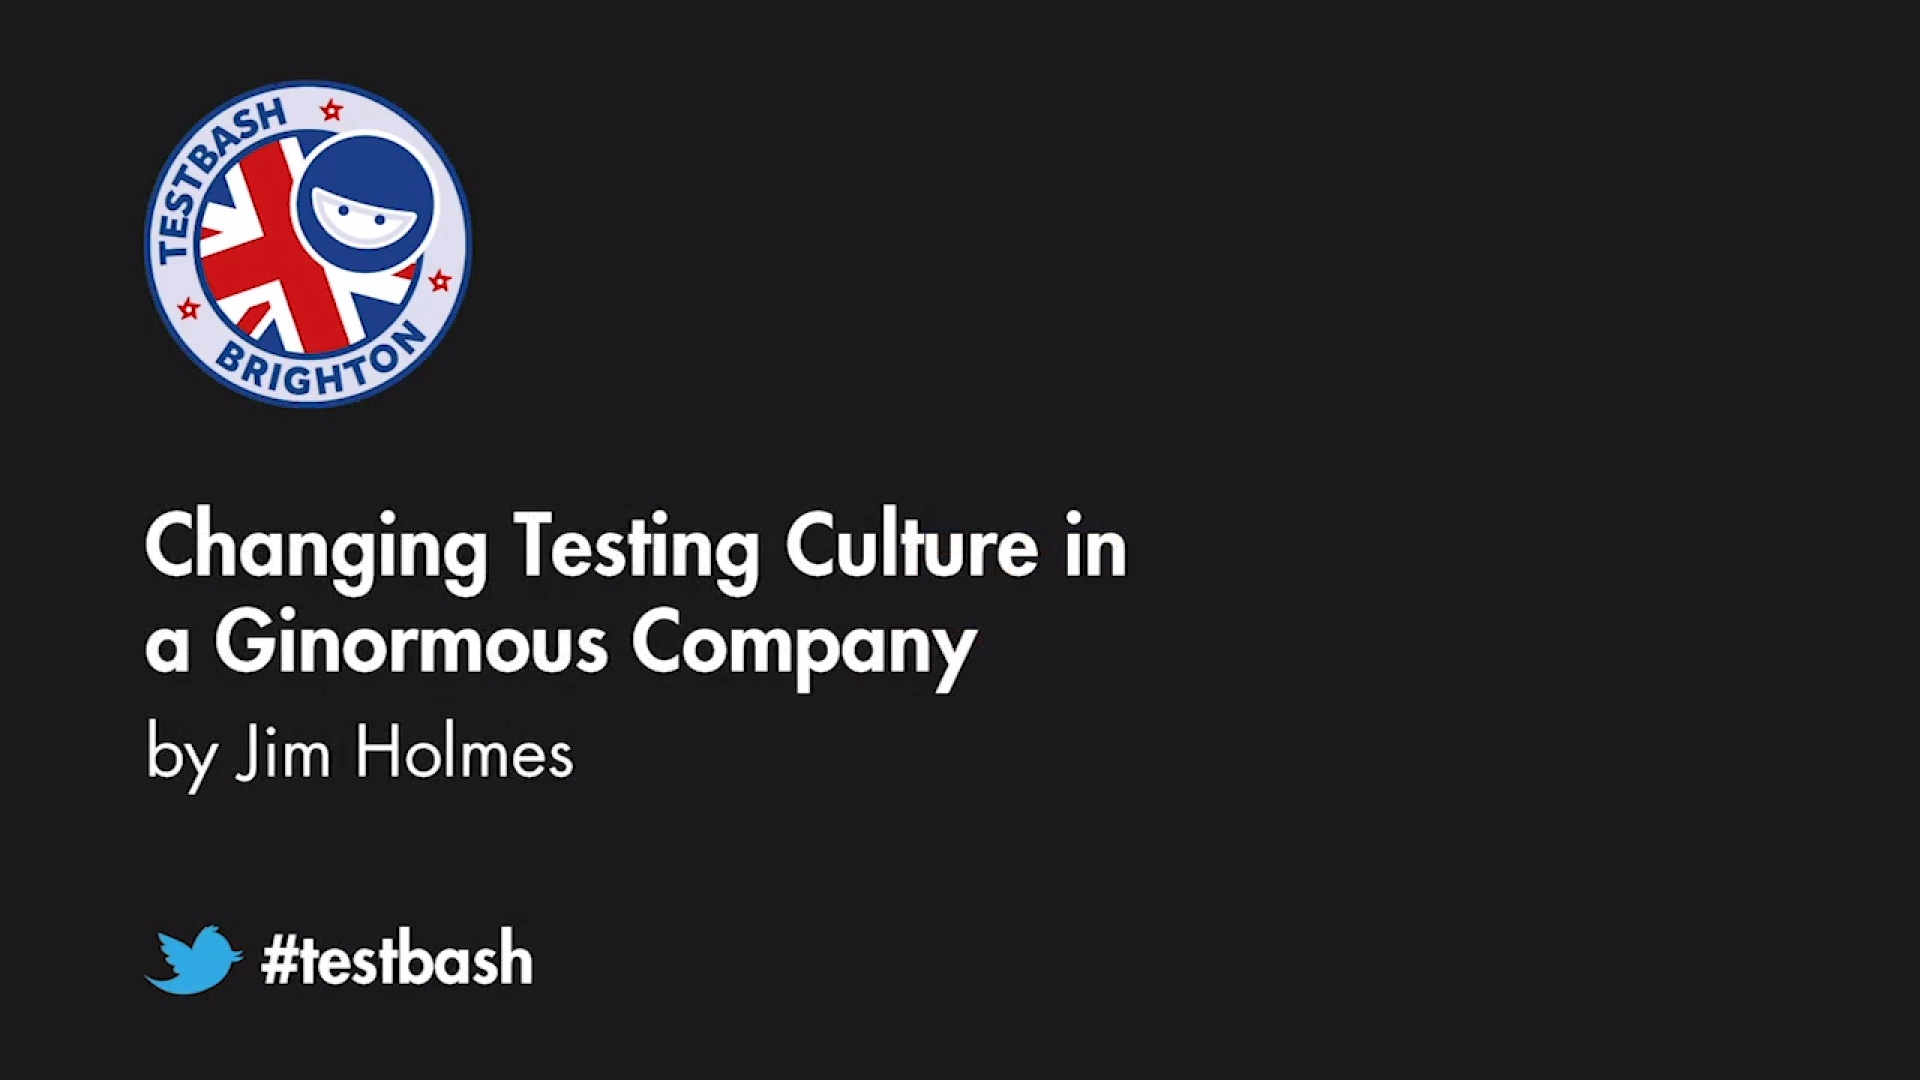 Changing Testing Culture in a Ginormous Company - Jim Holmes